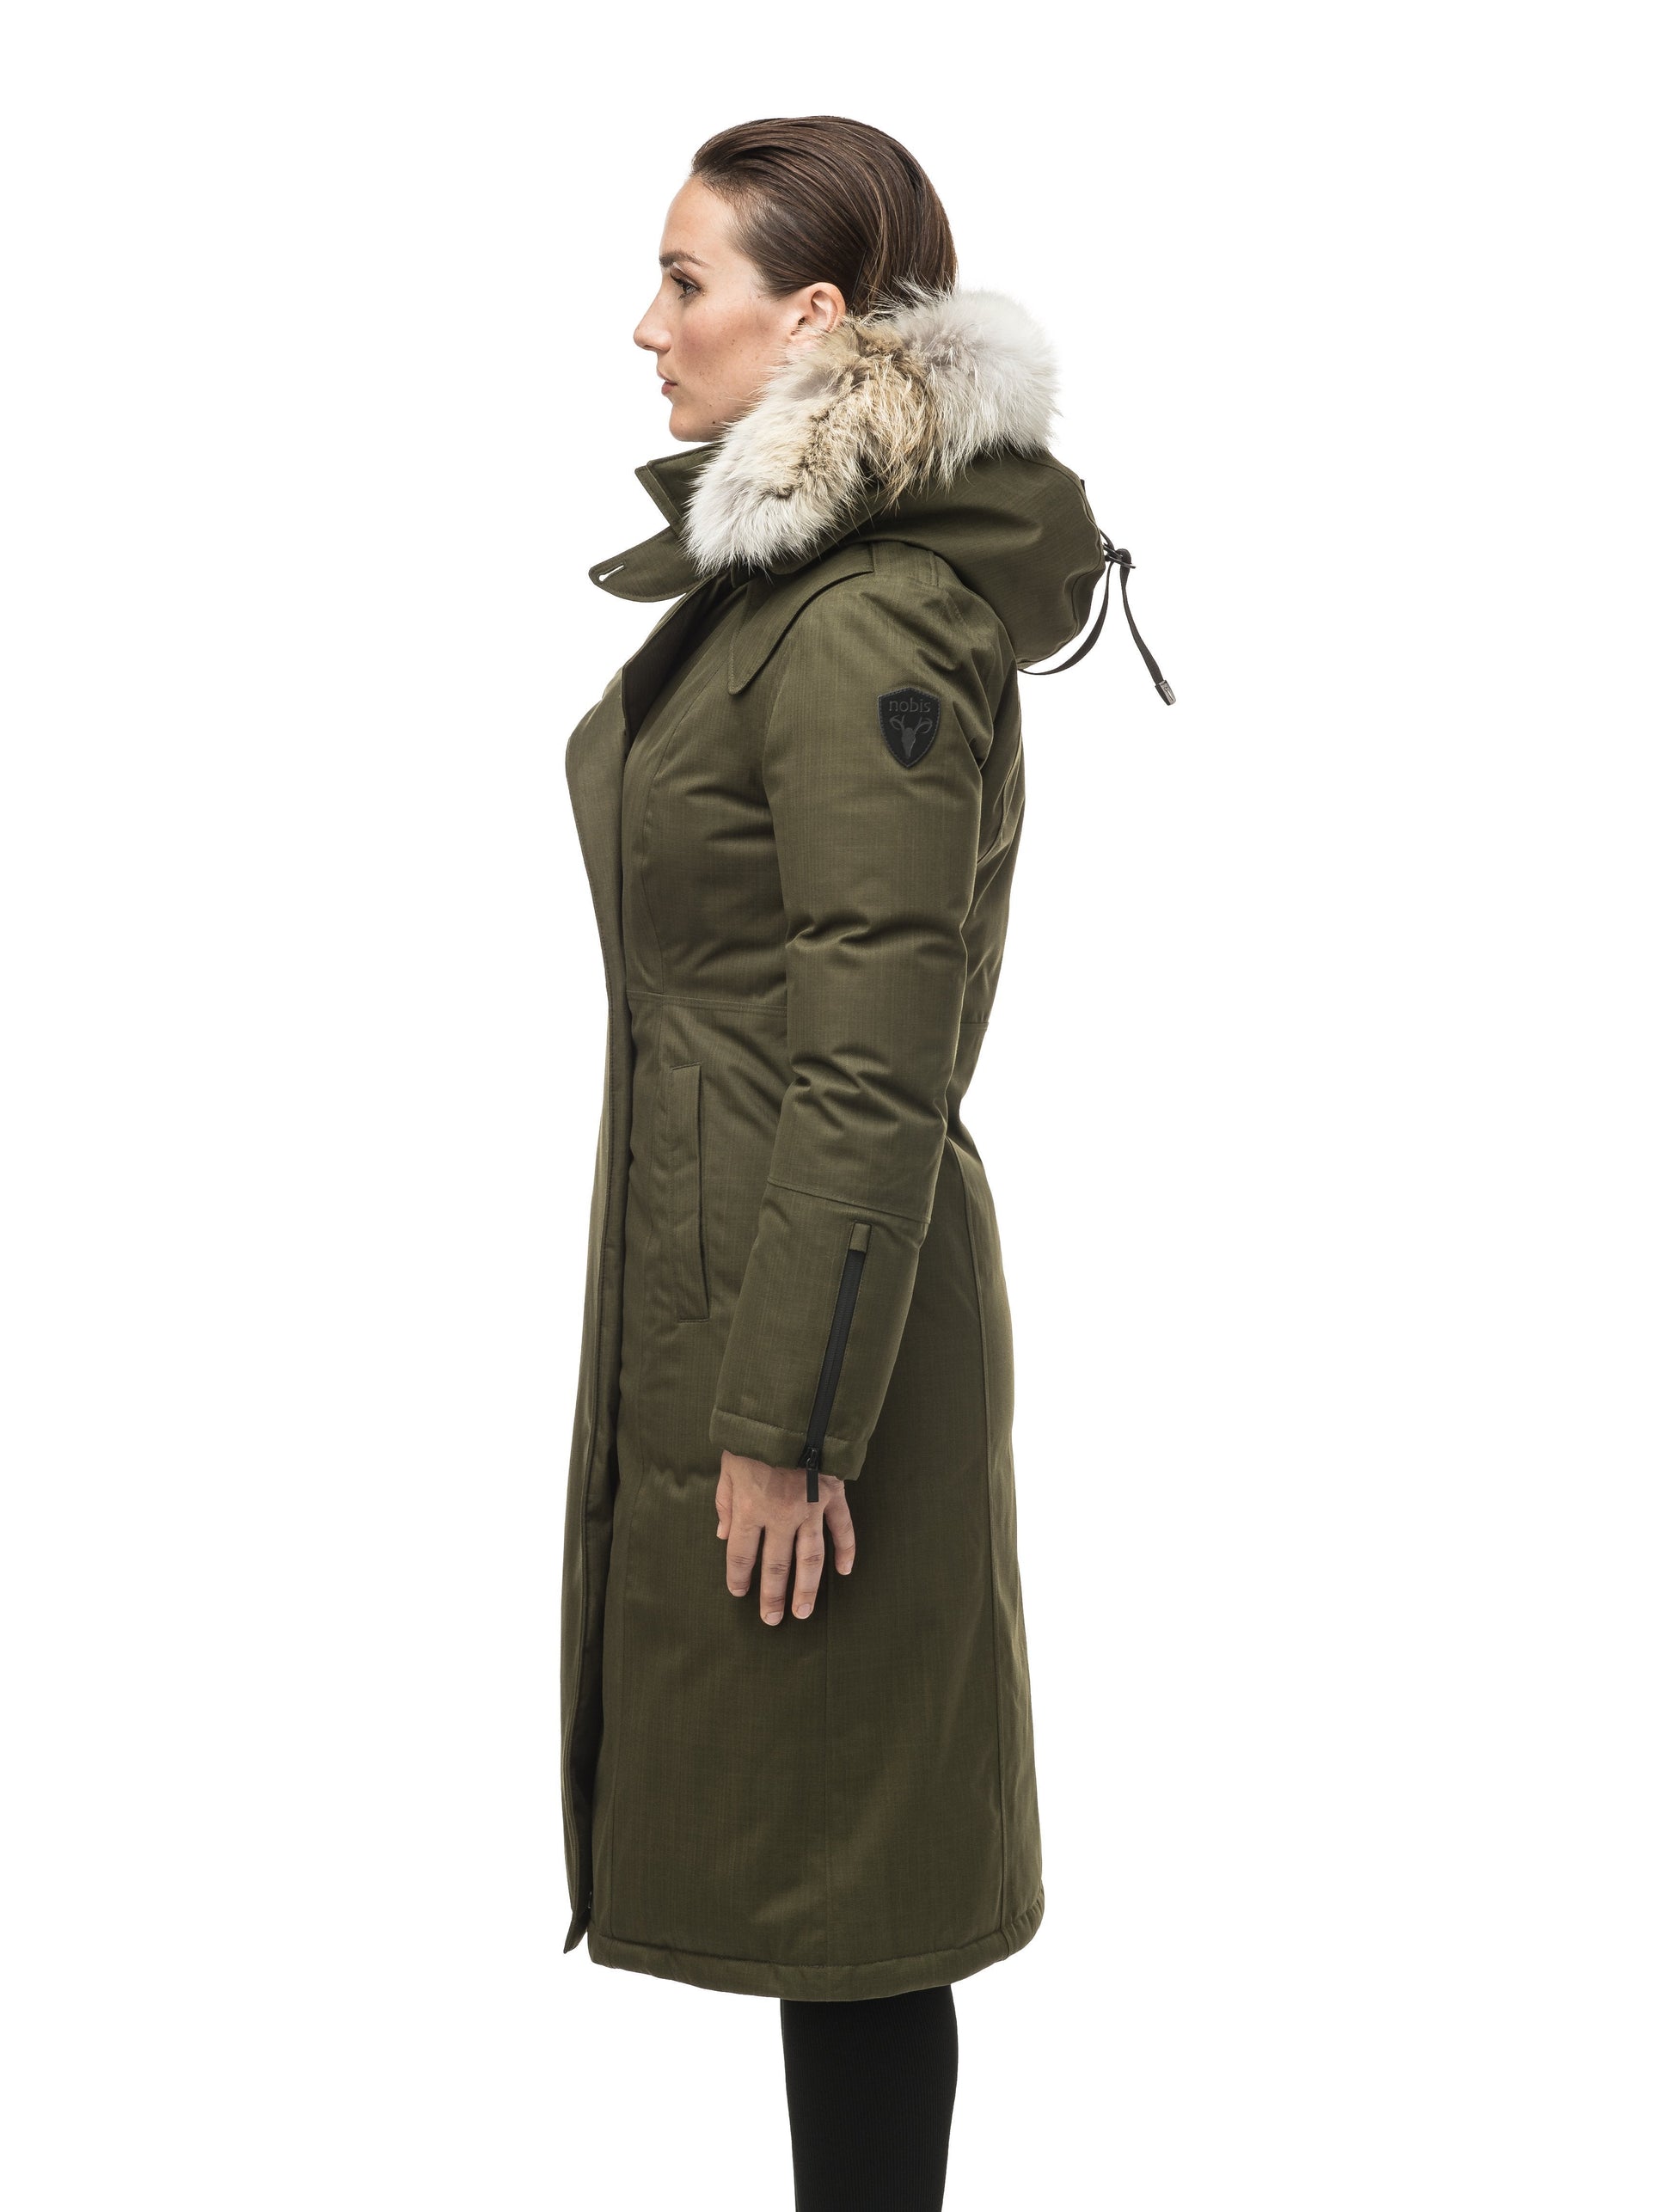 Long calf length women's trench inspired parka with removable fur trim around the hood and an asymetric closure in Fatigue